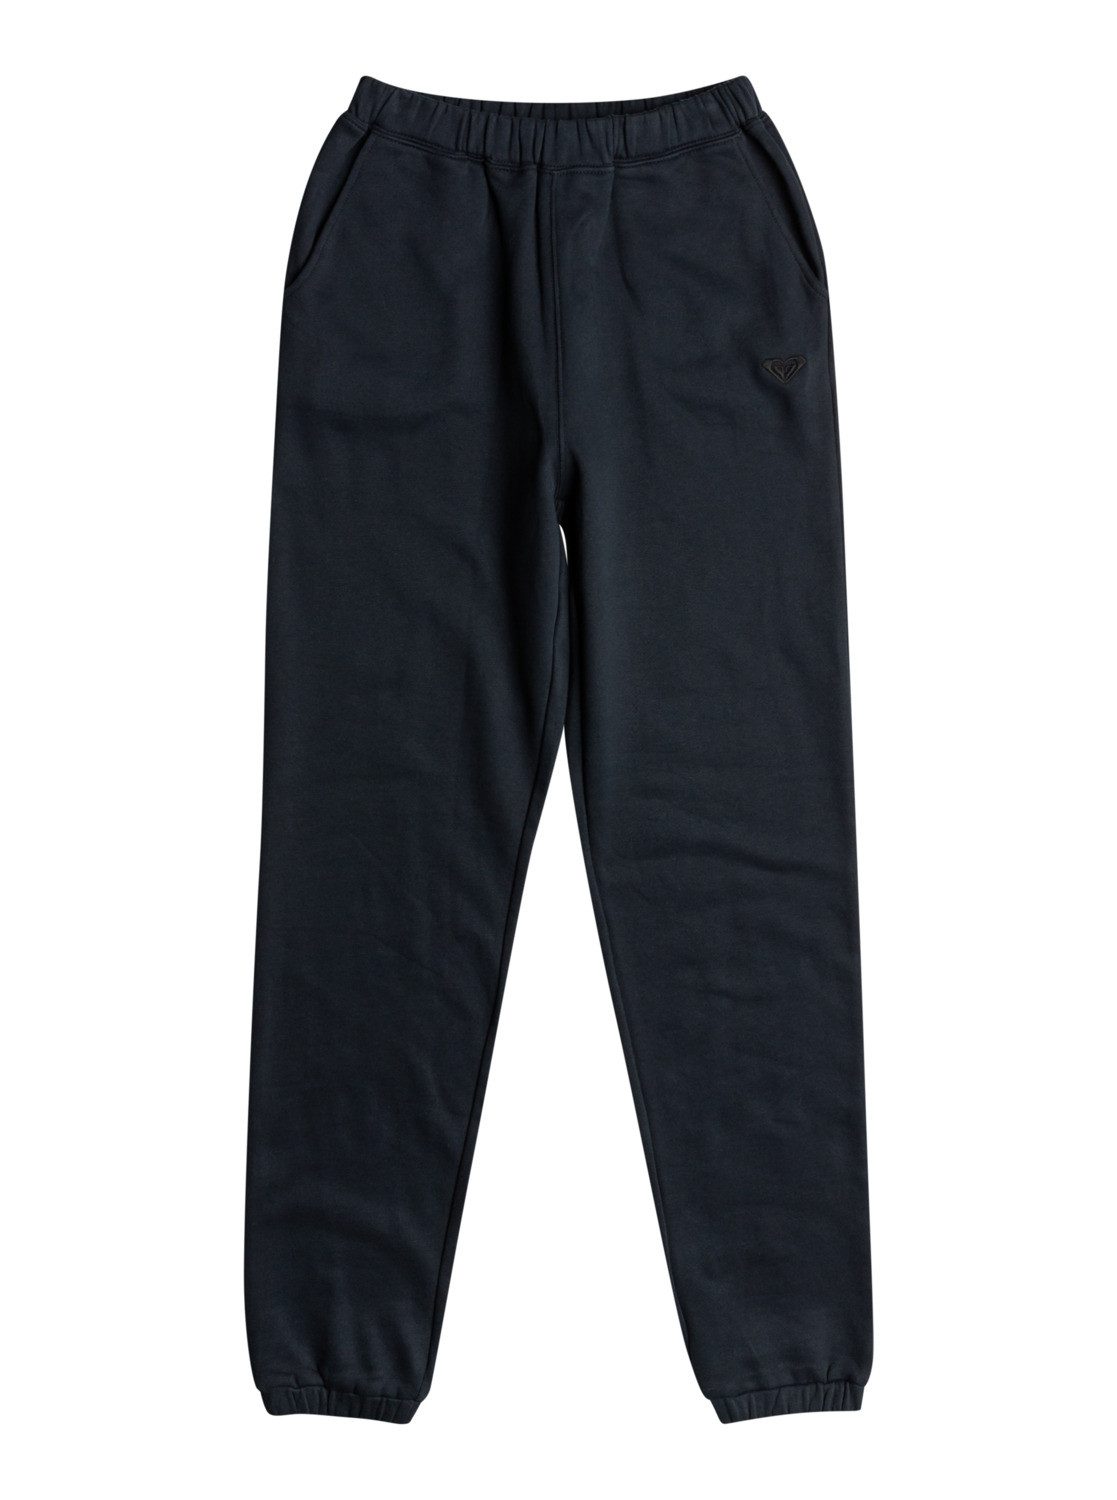 Energy Jogger Pants Roxy Essential Anthracite